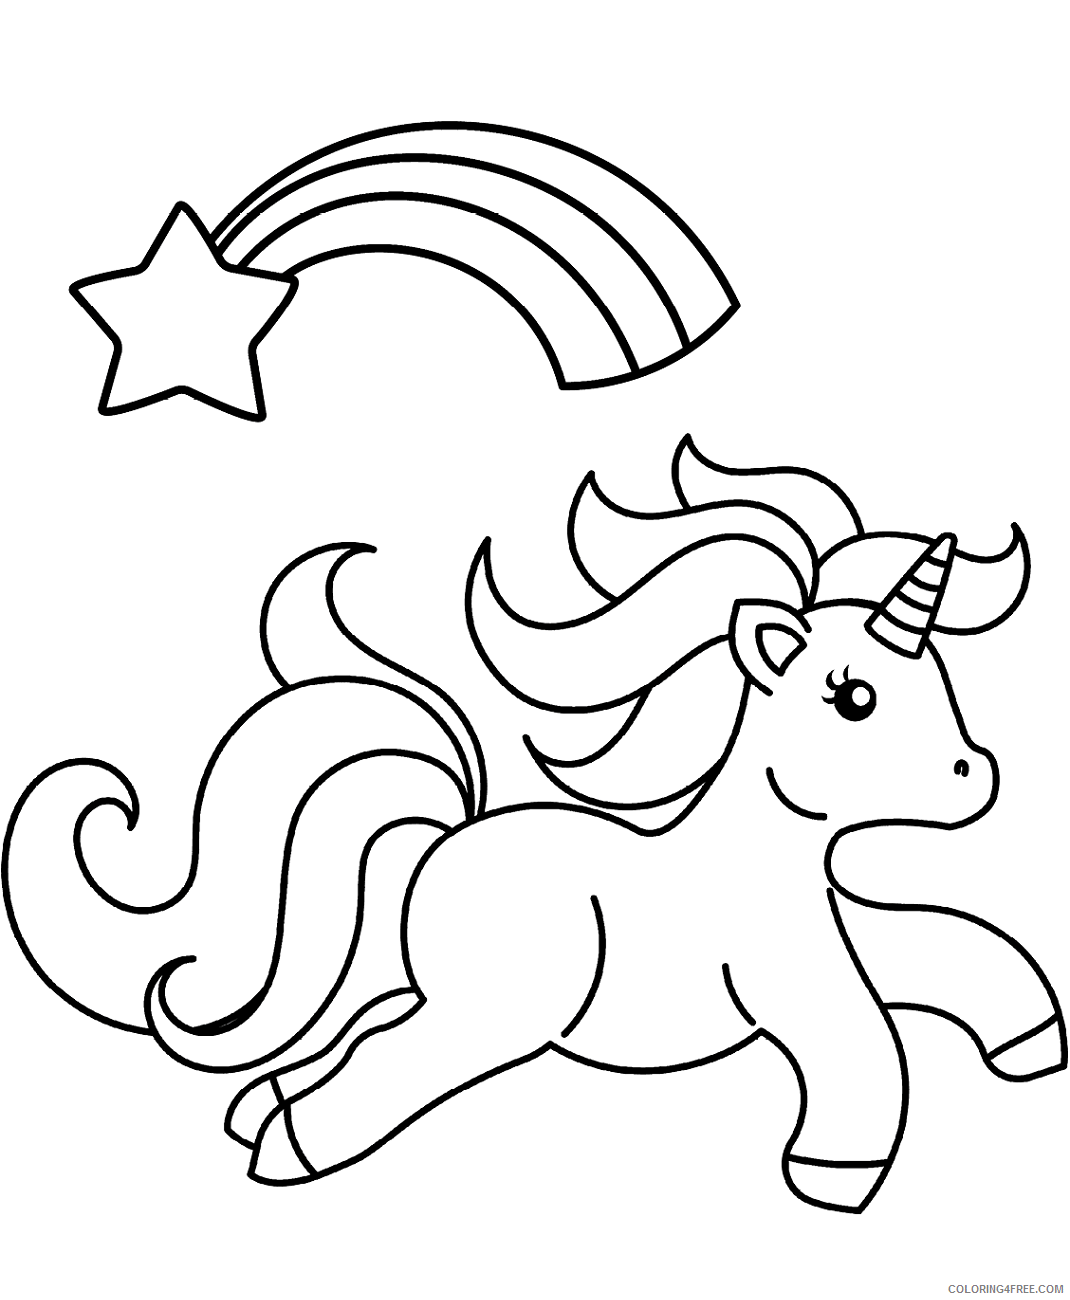 Unicorn Coloring Pages unicorn_with_a_shooting_star Printable 2021 6063 Coloring4free